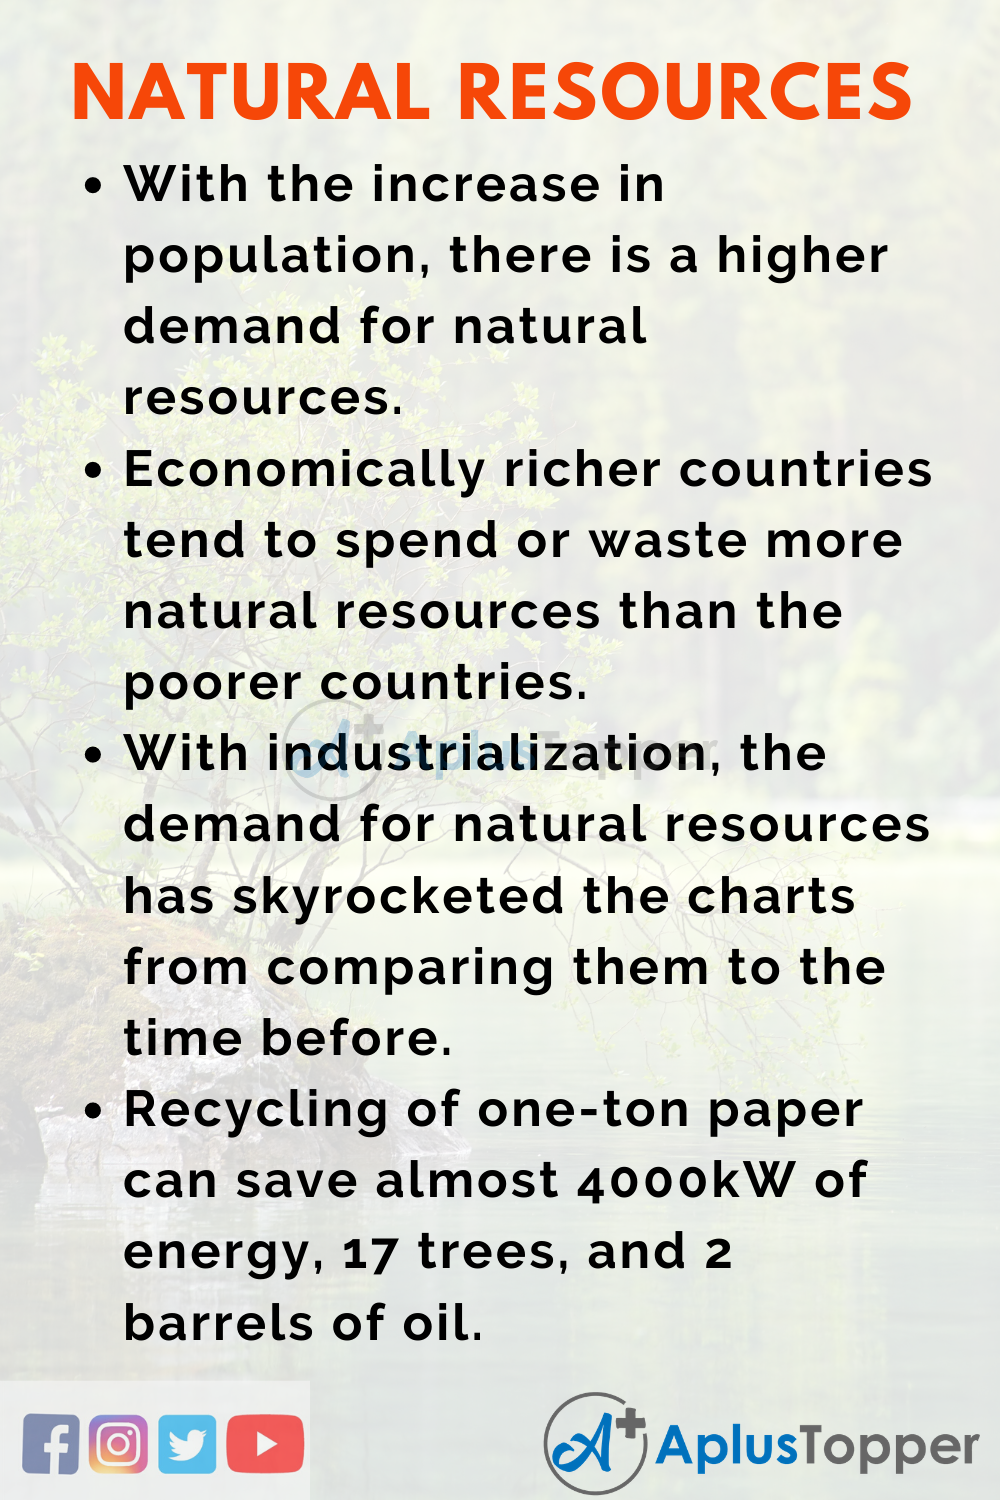 research paper topics on natural resources